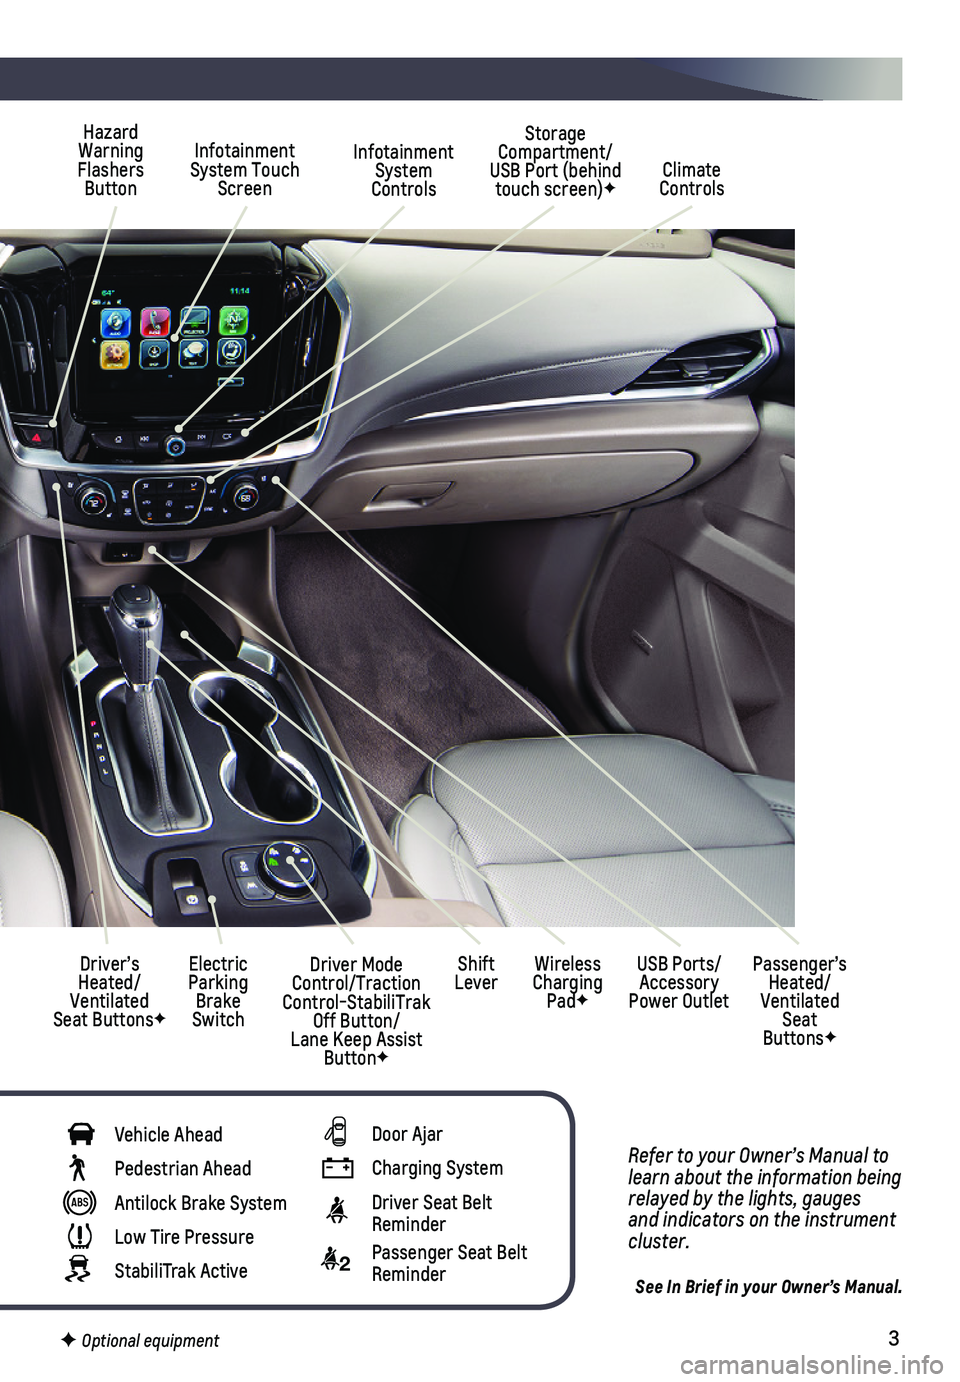 CHEVROLET TRAVERSE 2019  Get To Know Guide 3
Refer to your Owner’s Manual to learn about the information being relayed by the lights, gauges and indicators on the instrument cluster.
See In Brief in your Owner’s Manual.
Infotainment System